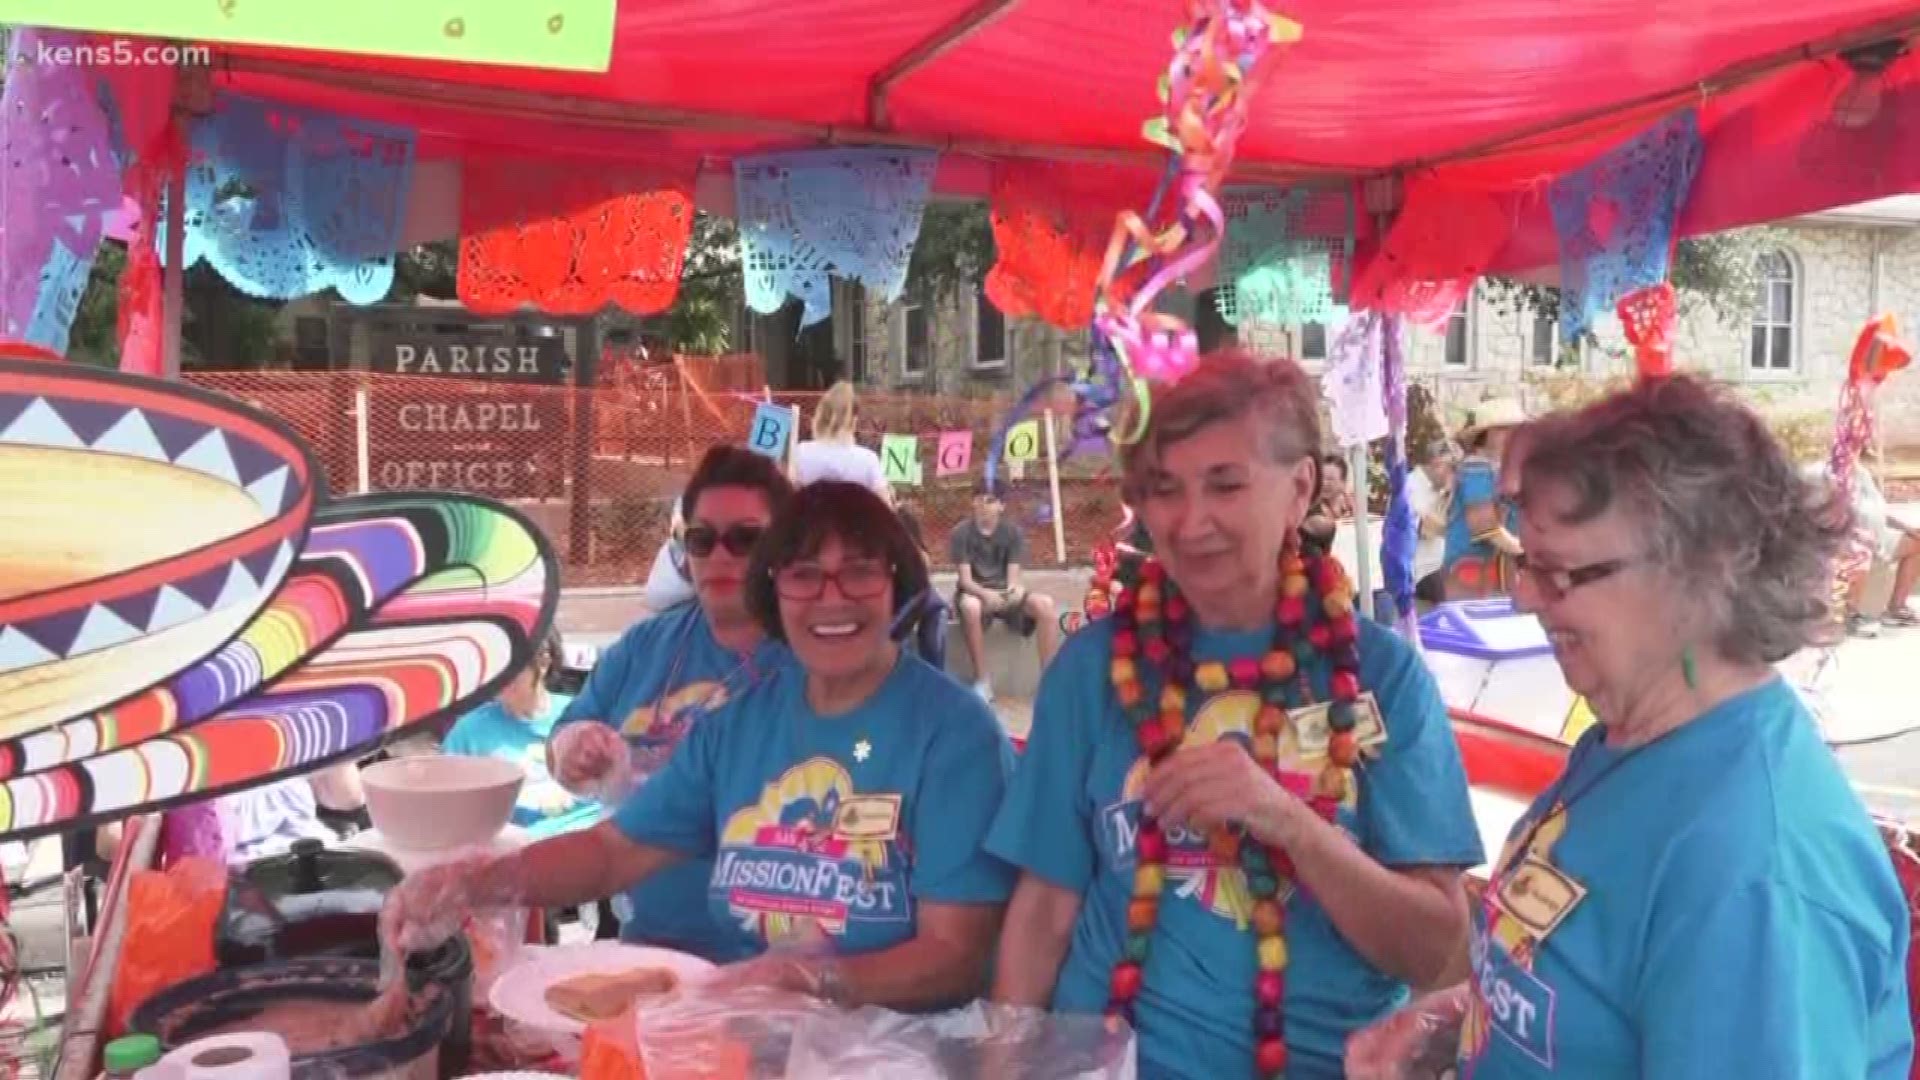 We're at the homestretch of fiesta and the party isn't ending without a few more big celebrations. Eyewitness news reporter Charlie Cooper has more.